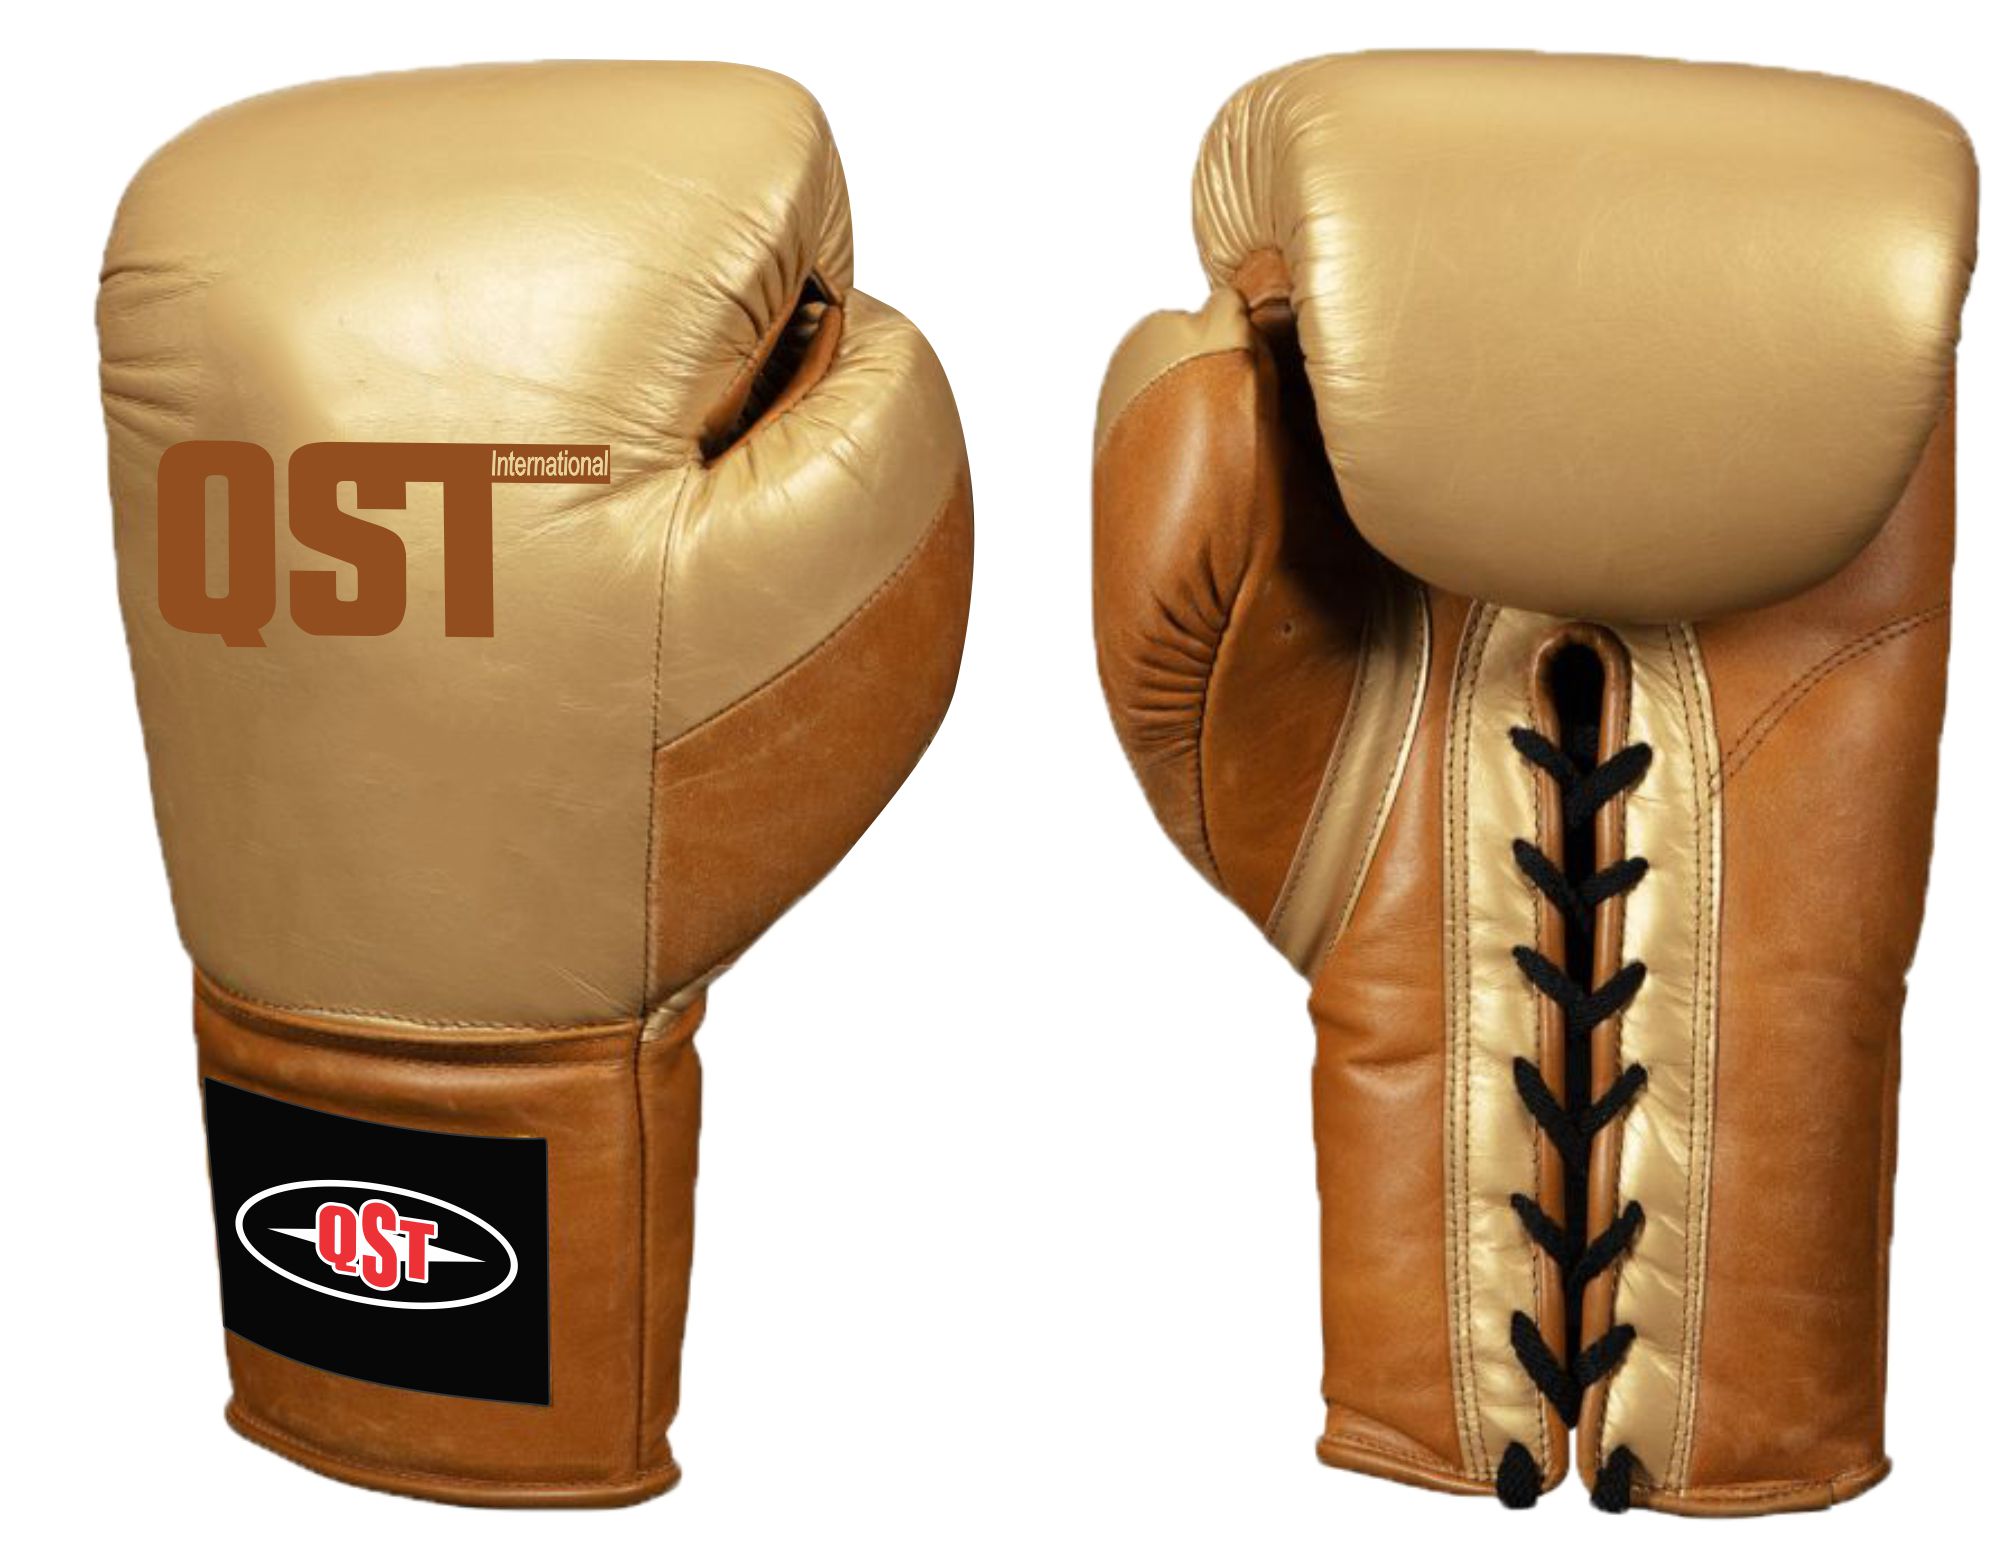 Lace up Boxing Gloves - PRG-3261